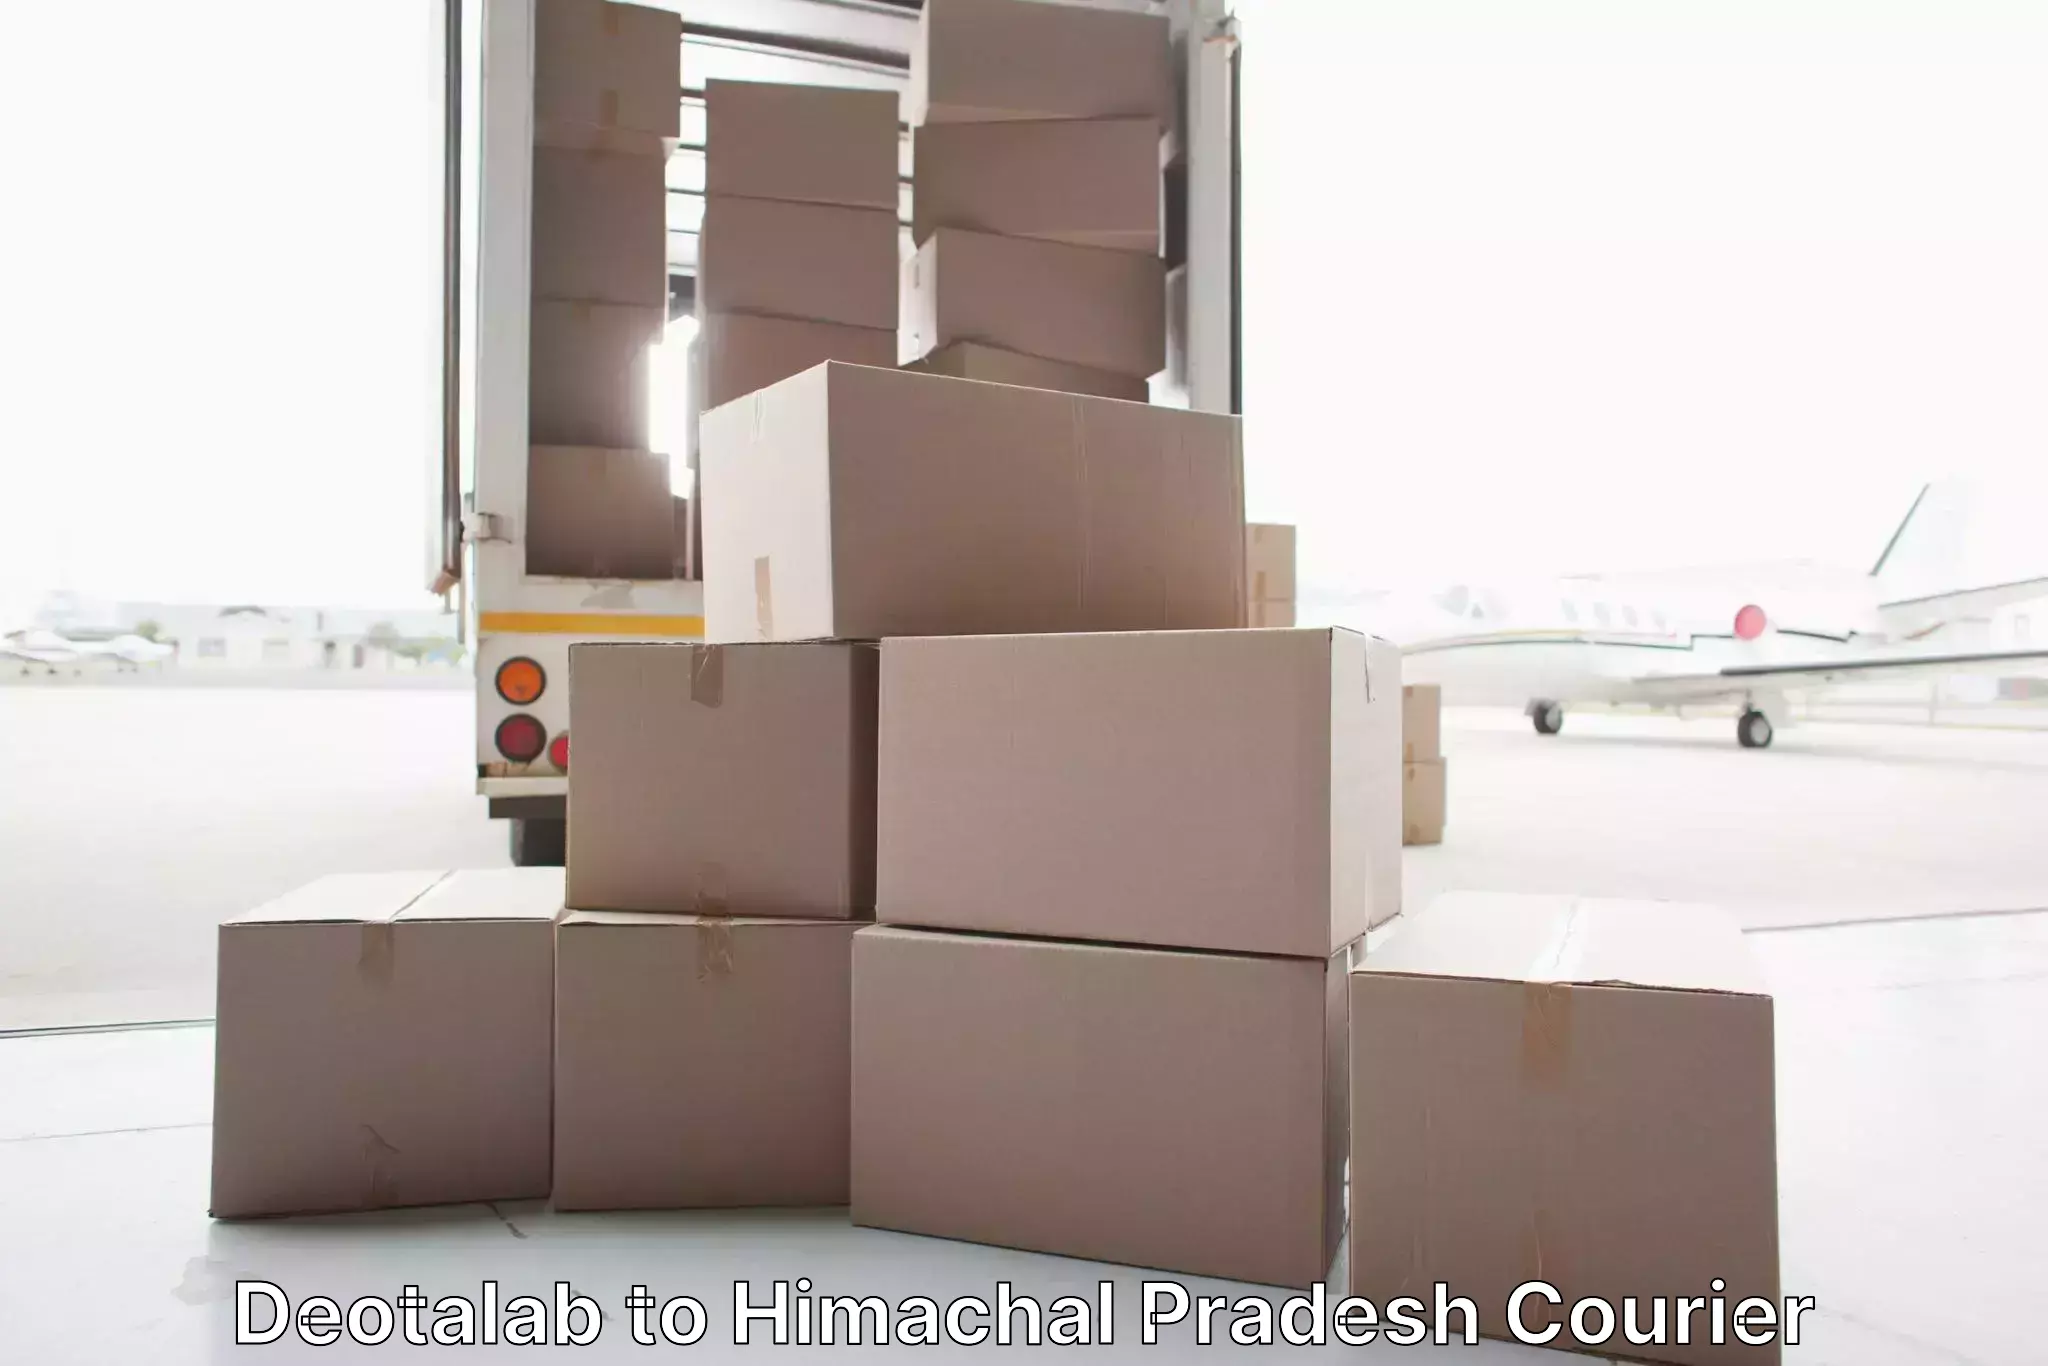 Furniture moving experts Deotalab to Salouni